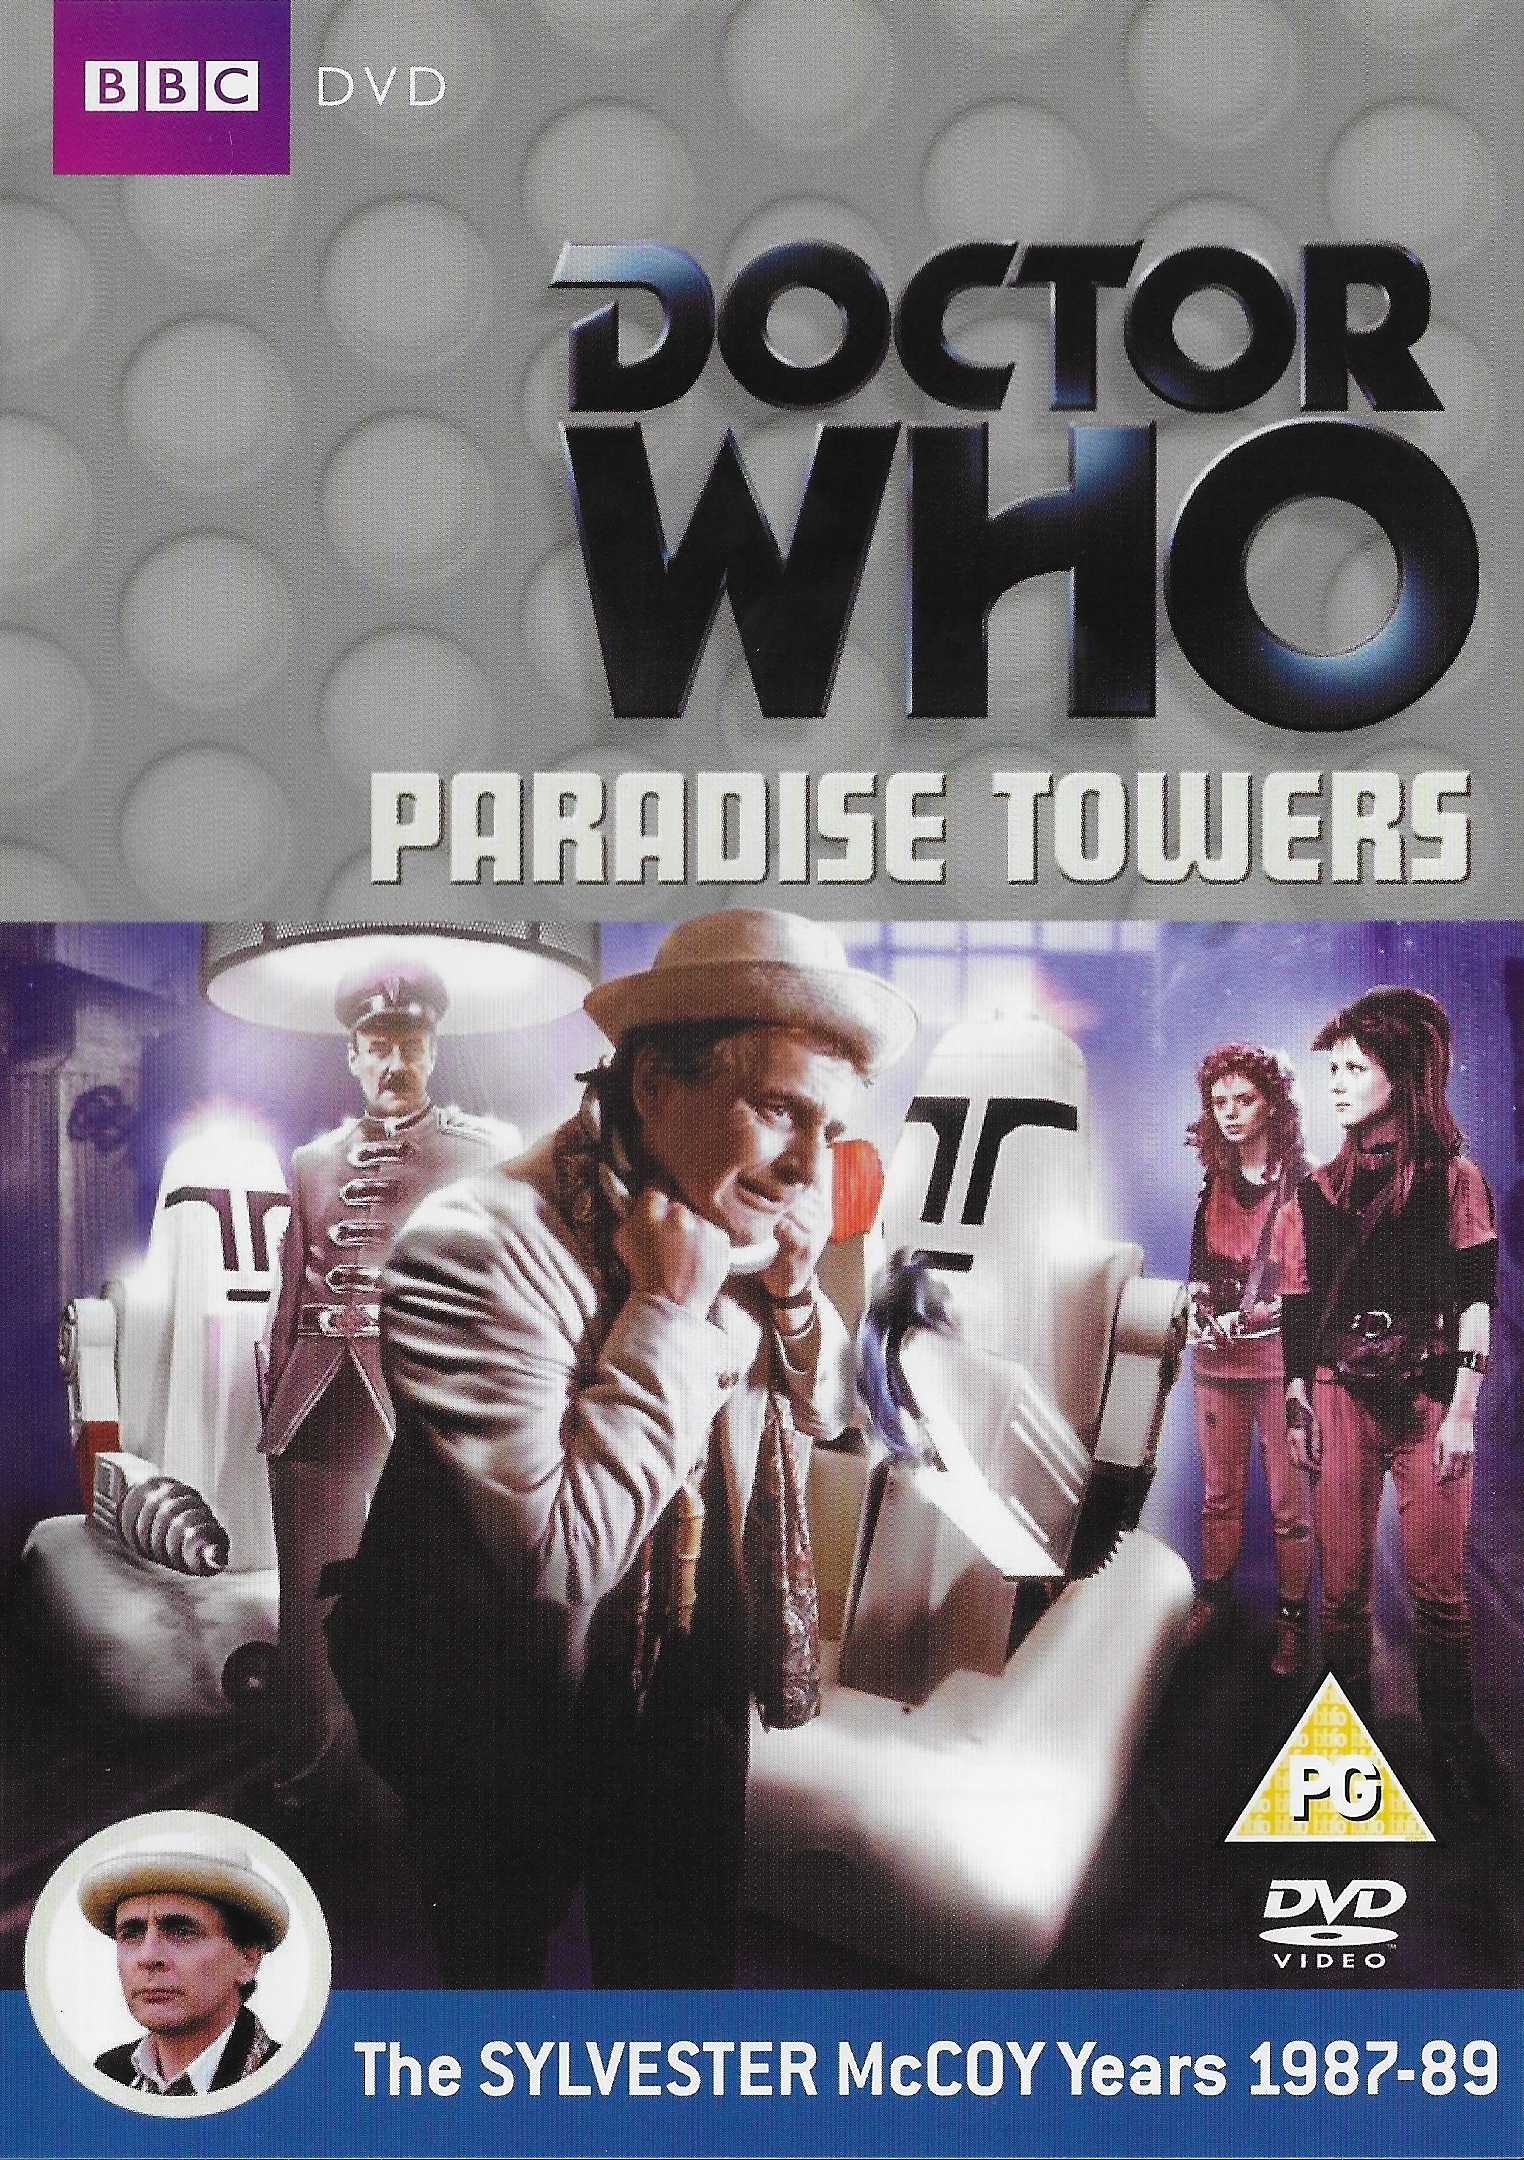 Picture of BBCDVD 3002 Doctor Who - Paradise towers by artist Stephen Wyatt from the BBC records and Tapes library